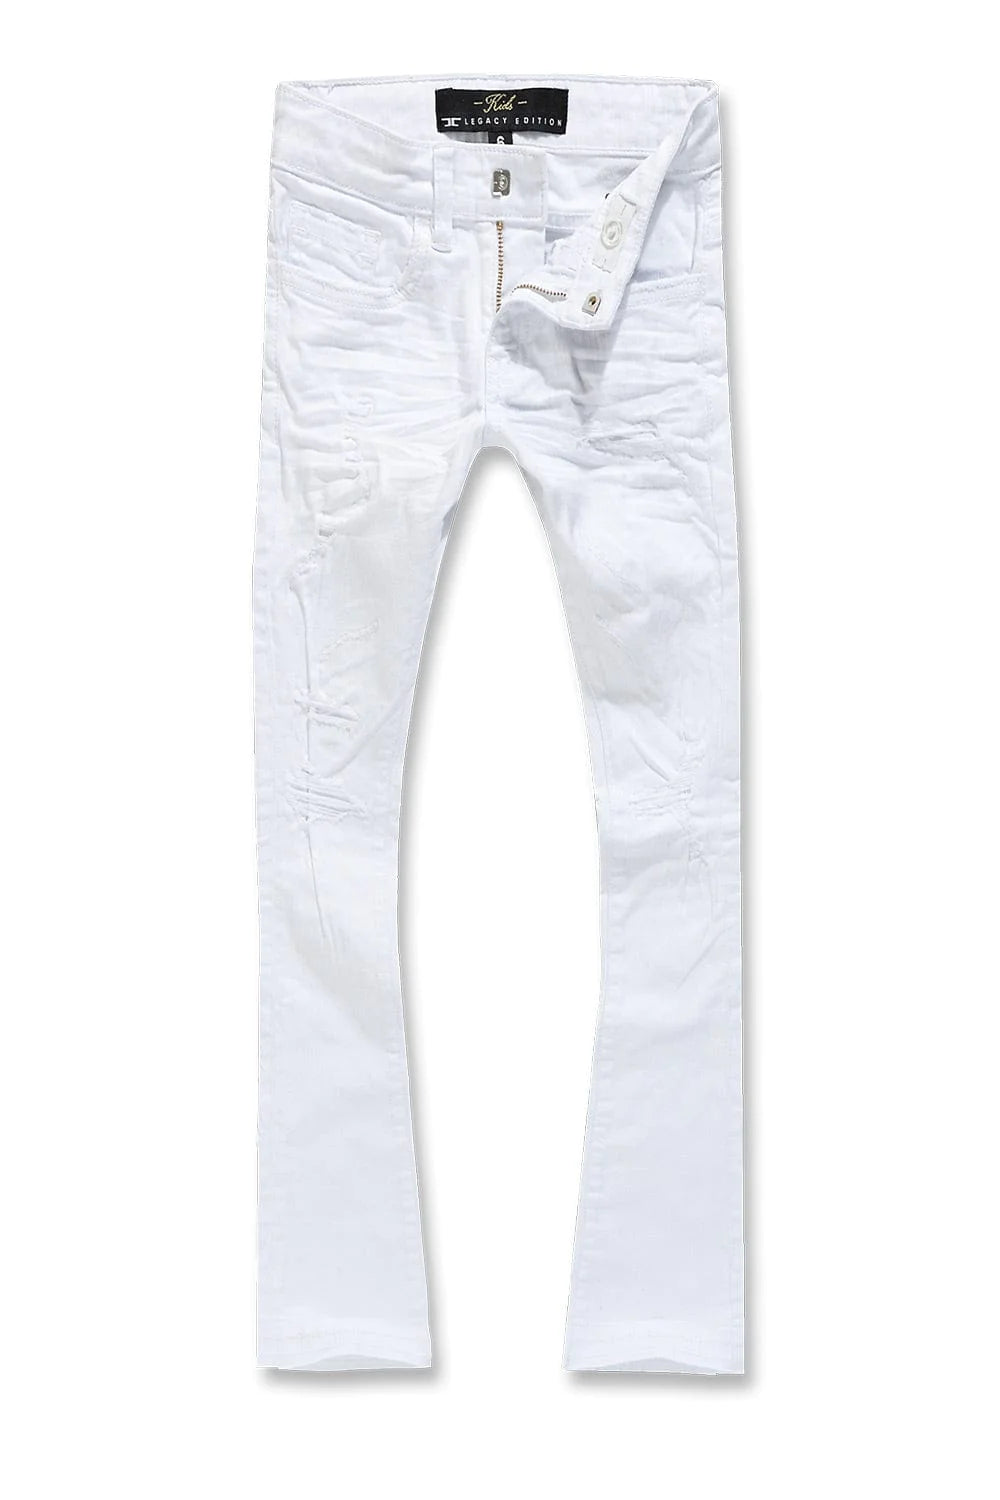 Kids Tribeca Twill Stacked Pants - White